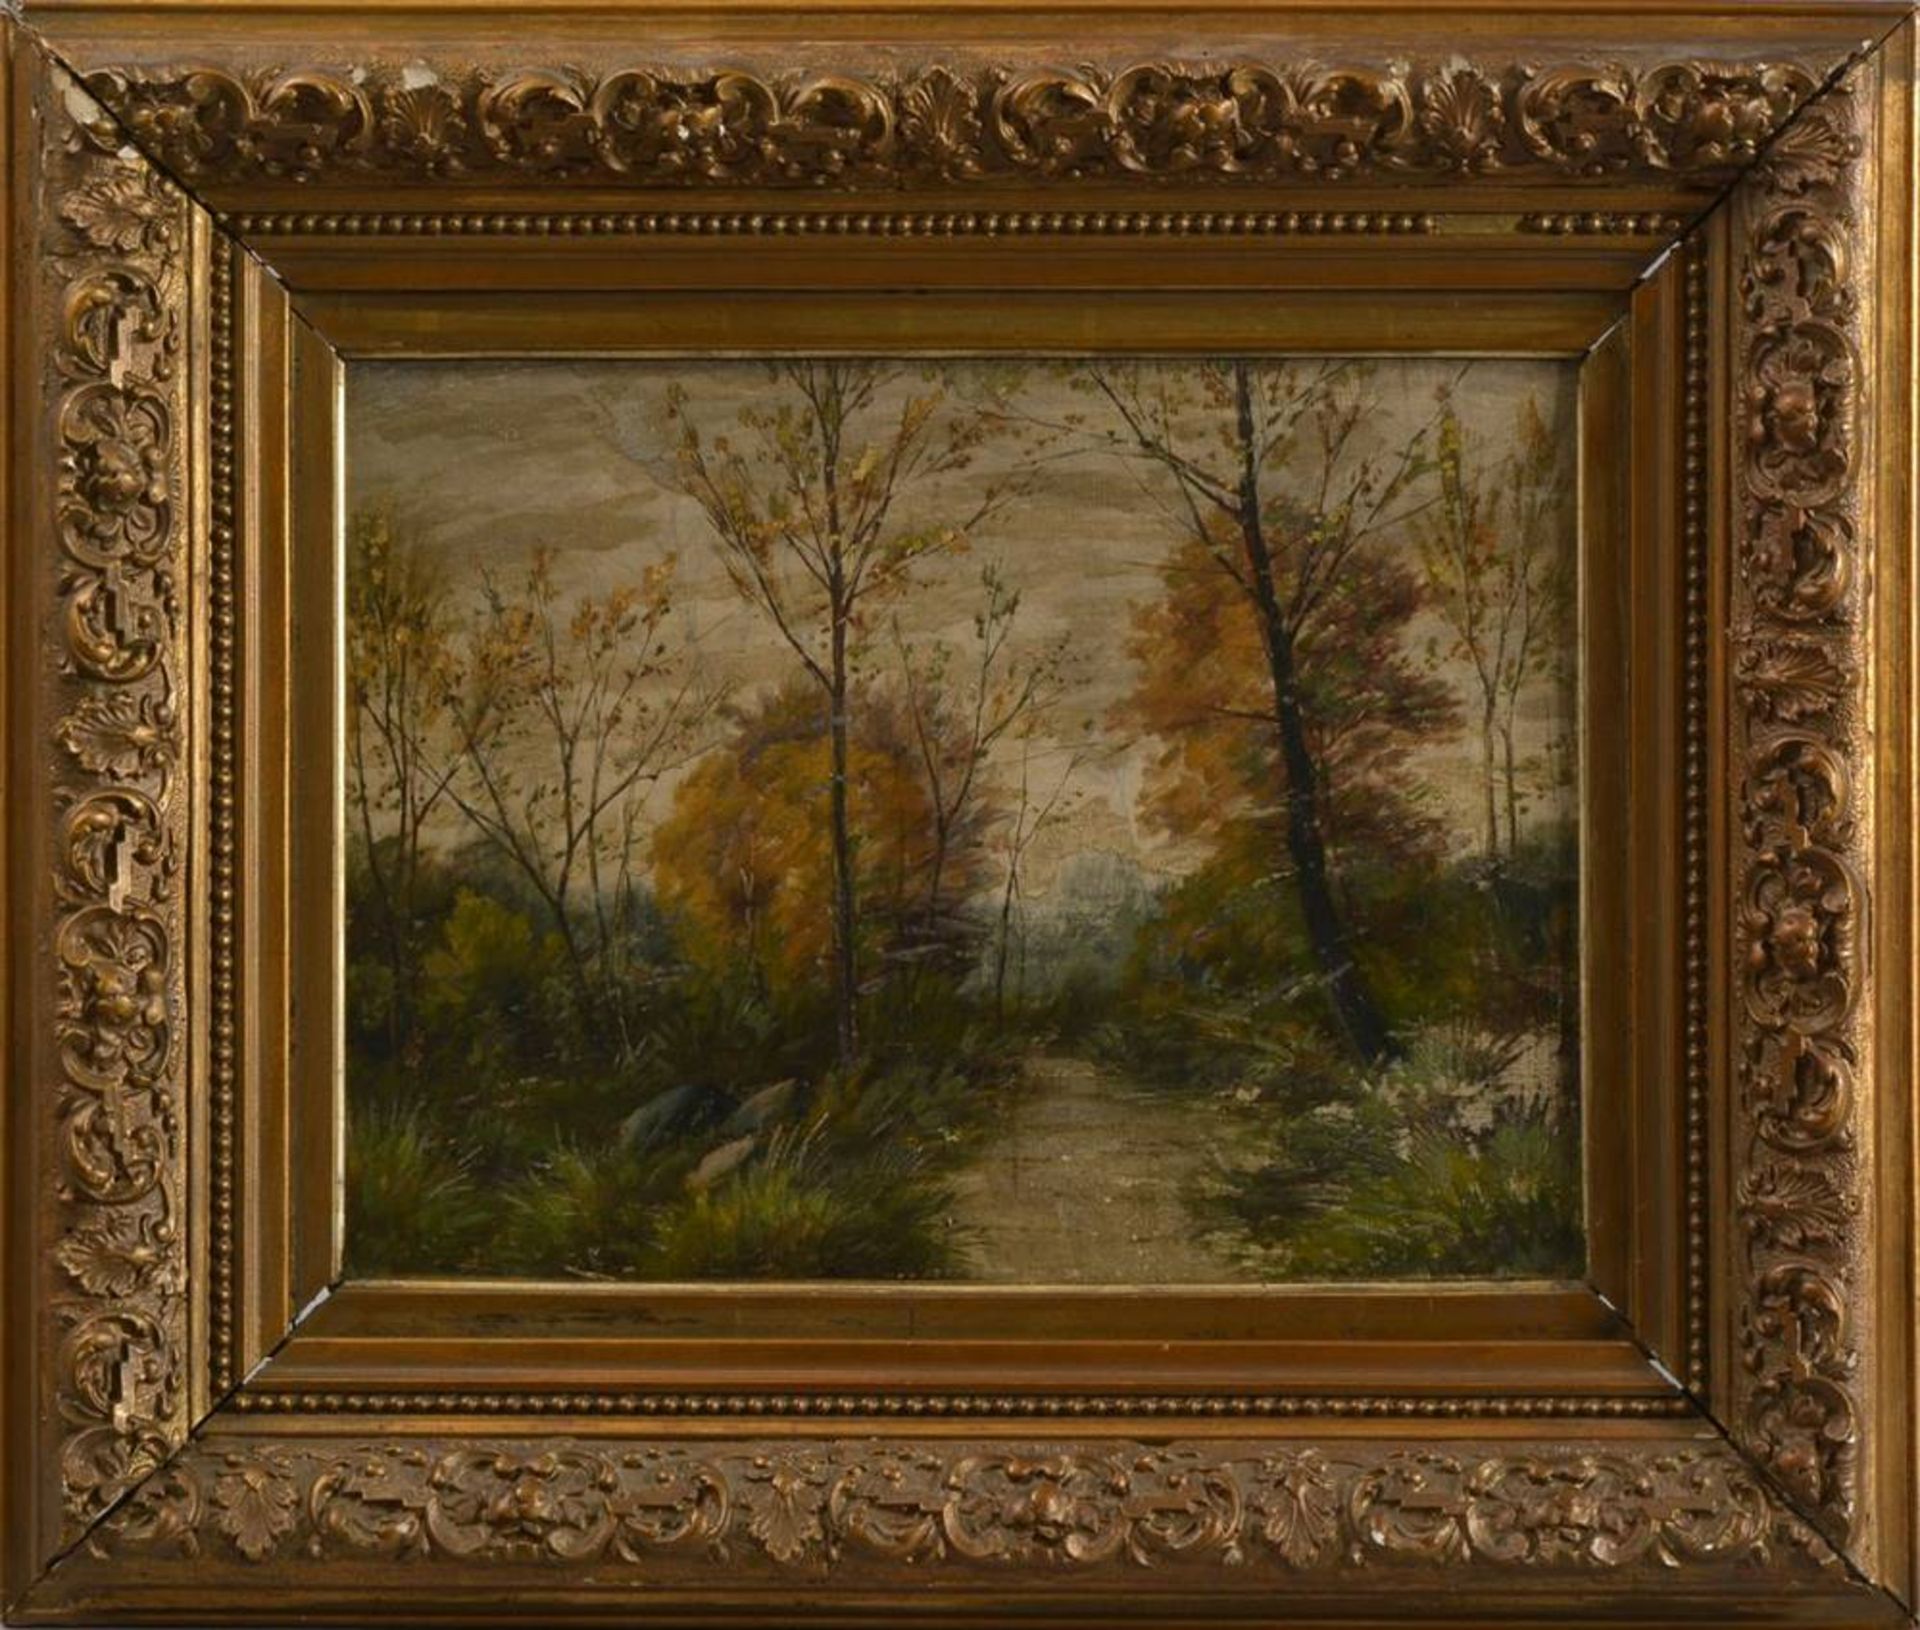 Autumn landscape with brookanonymous, ca. 1900, oil on canvas, unsigned, ca. 30x40cm, framed (ca.